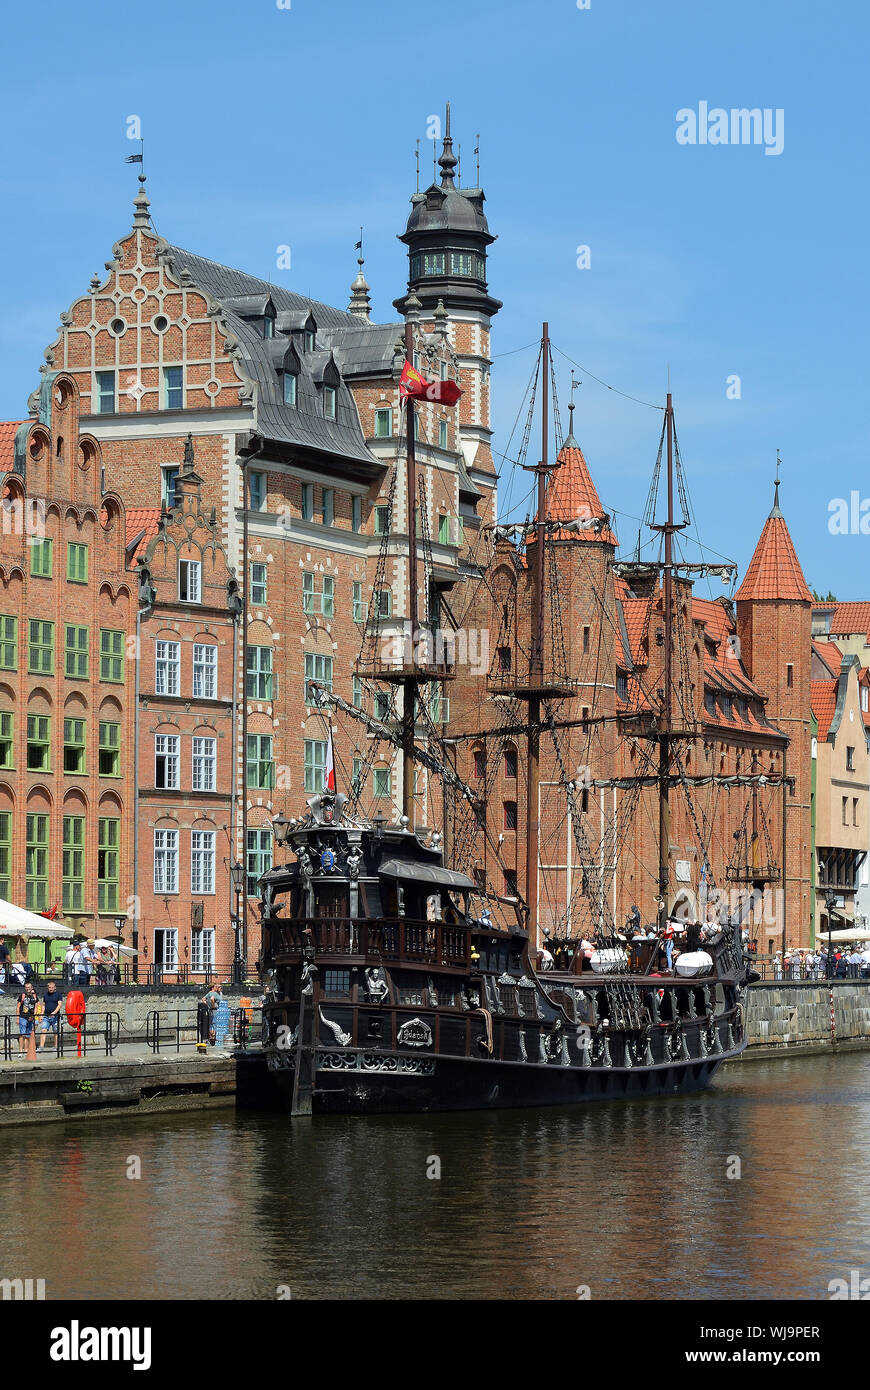 Cityscape of Gdansk at the river Motlawa with Old sailing ship - Poland. Stock Photo